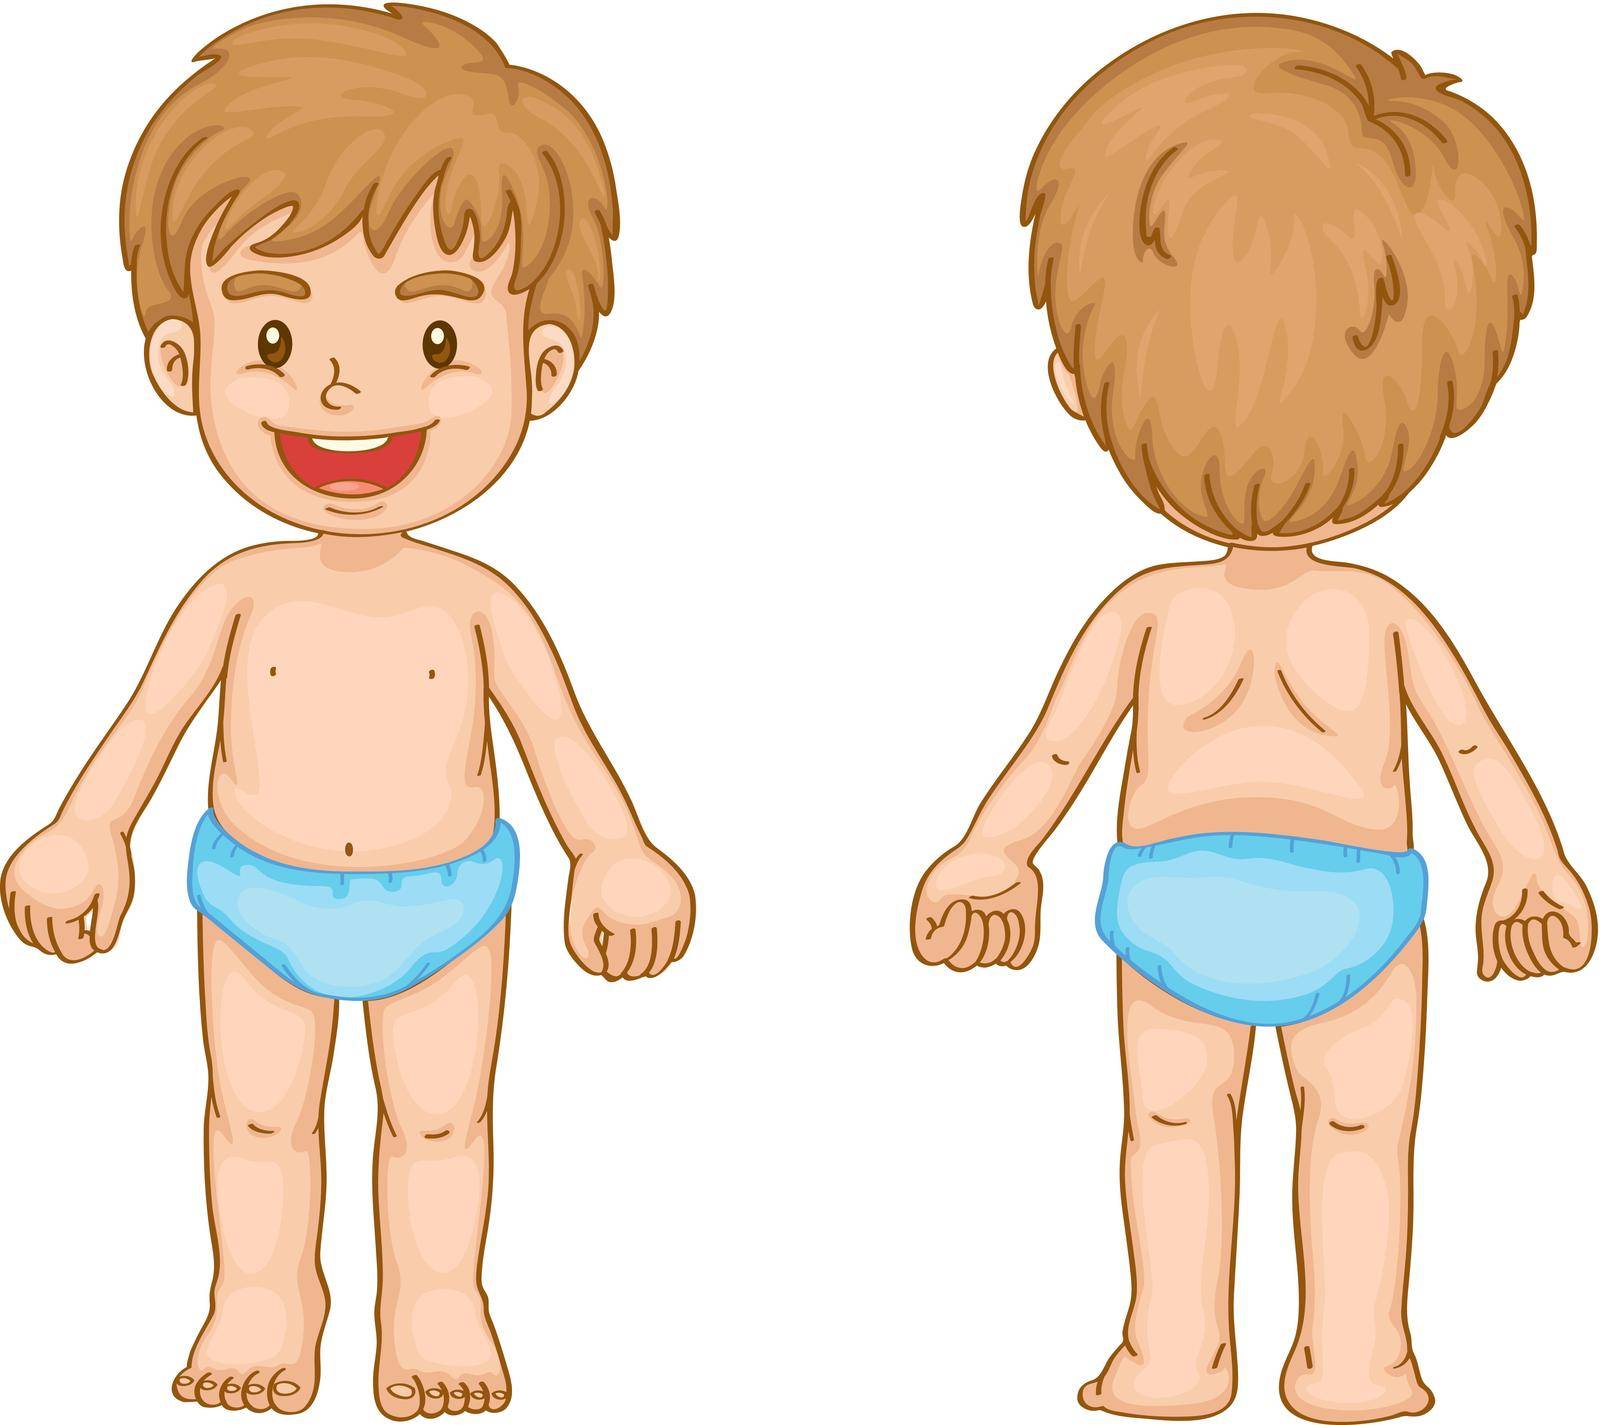 Boy body parts by iimages